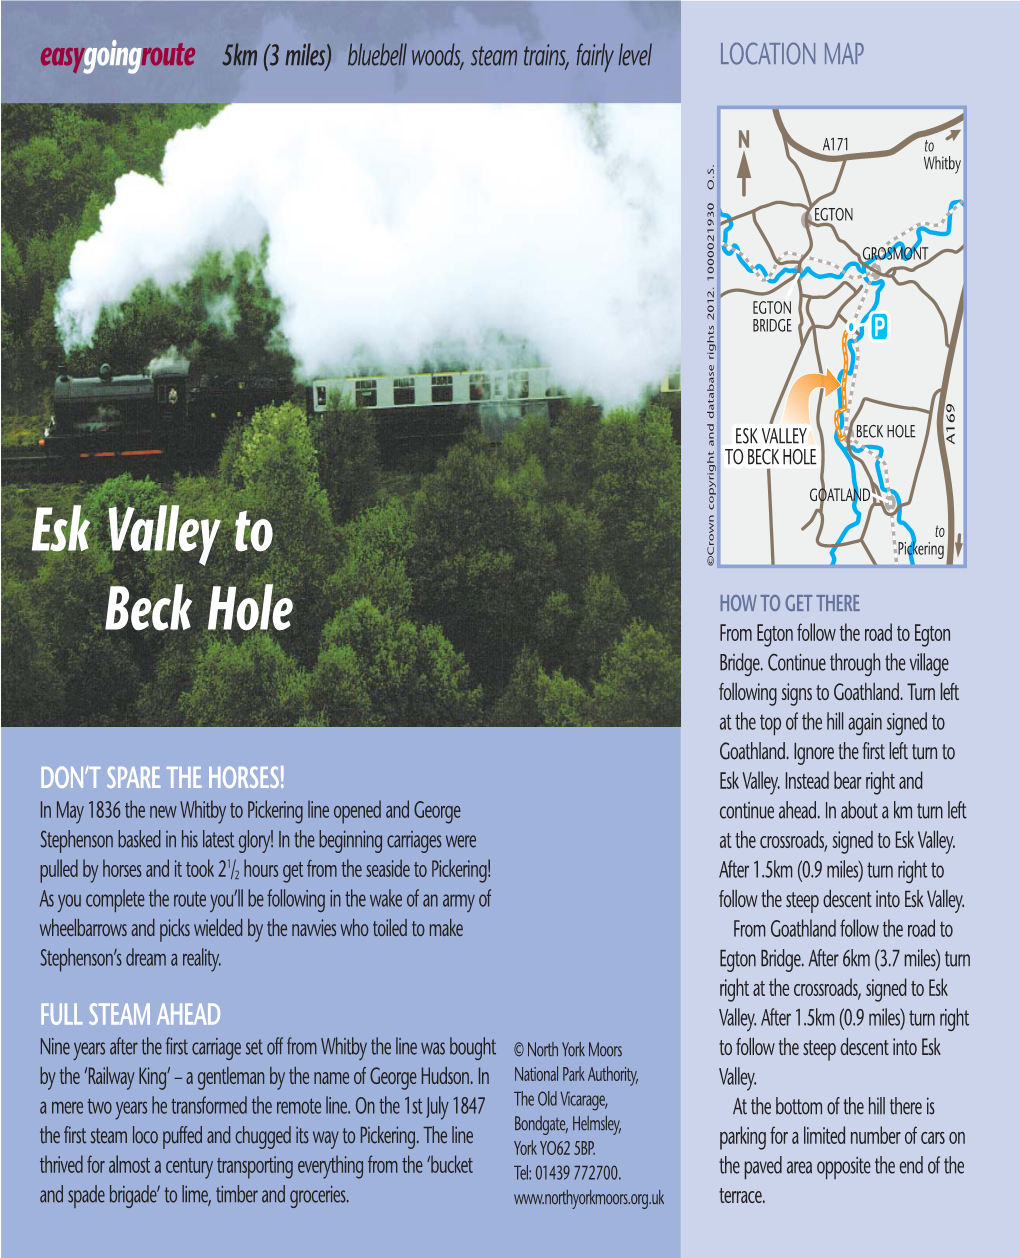 Esk-Valley-To-Beck-Hole-Easy-Going